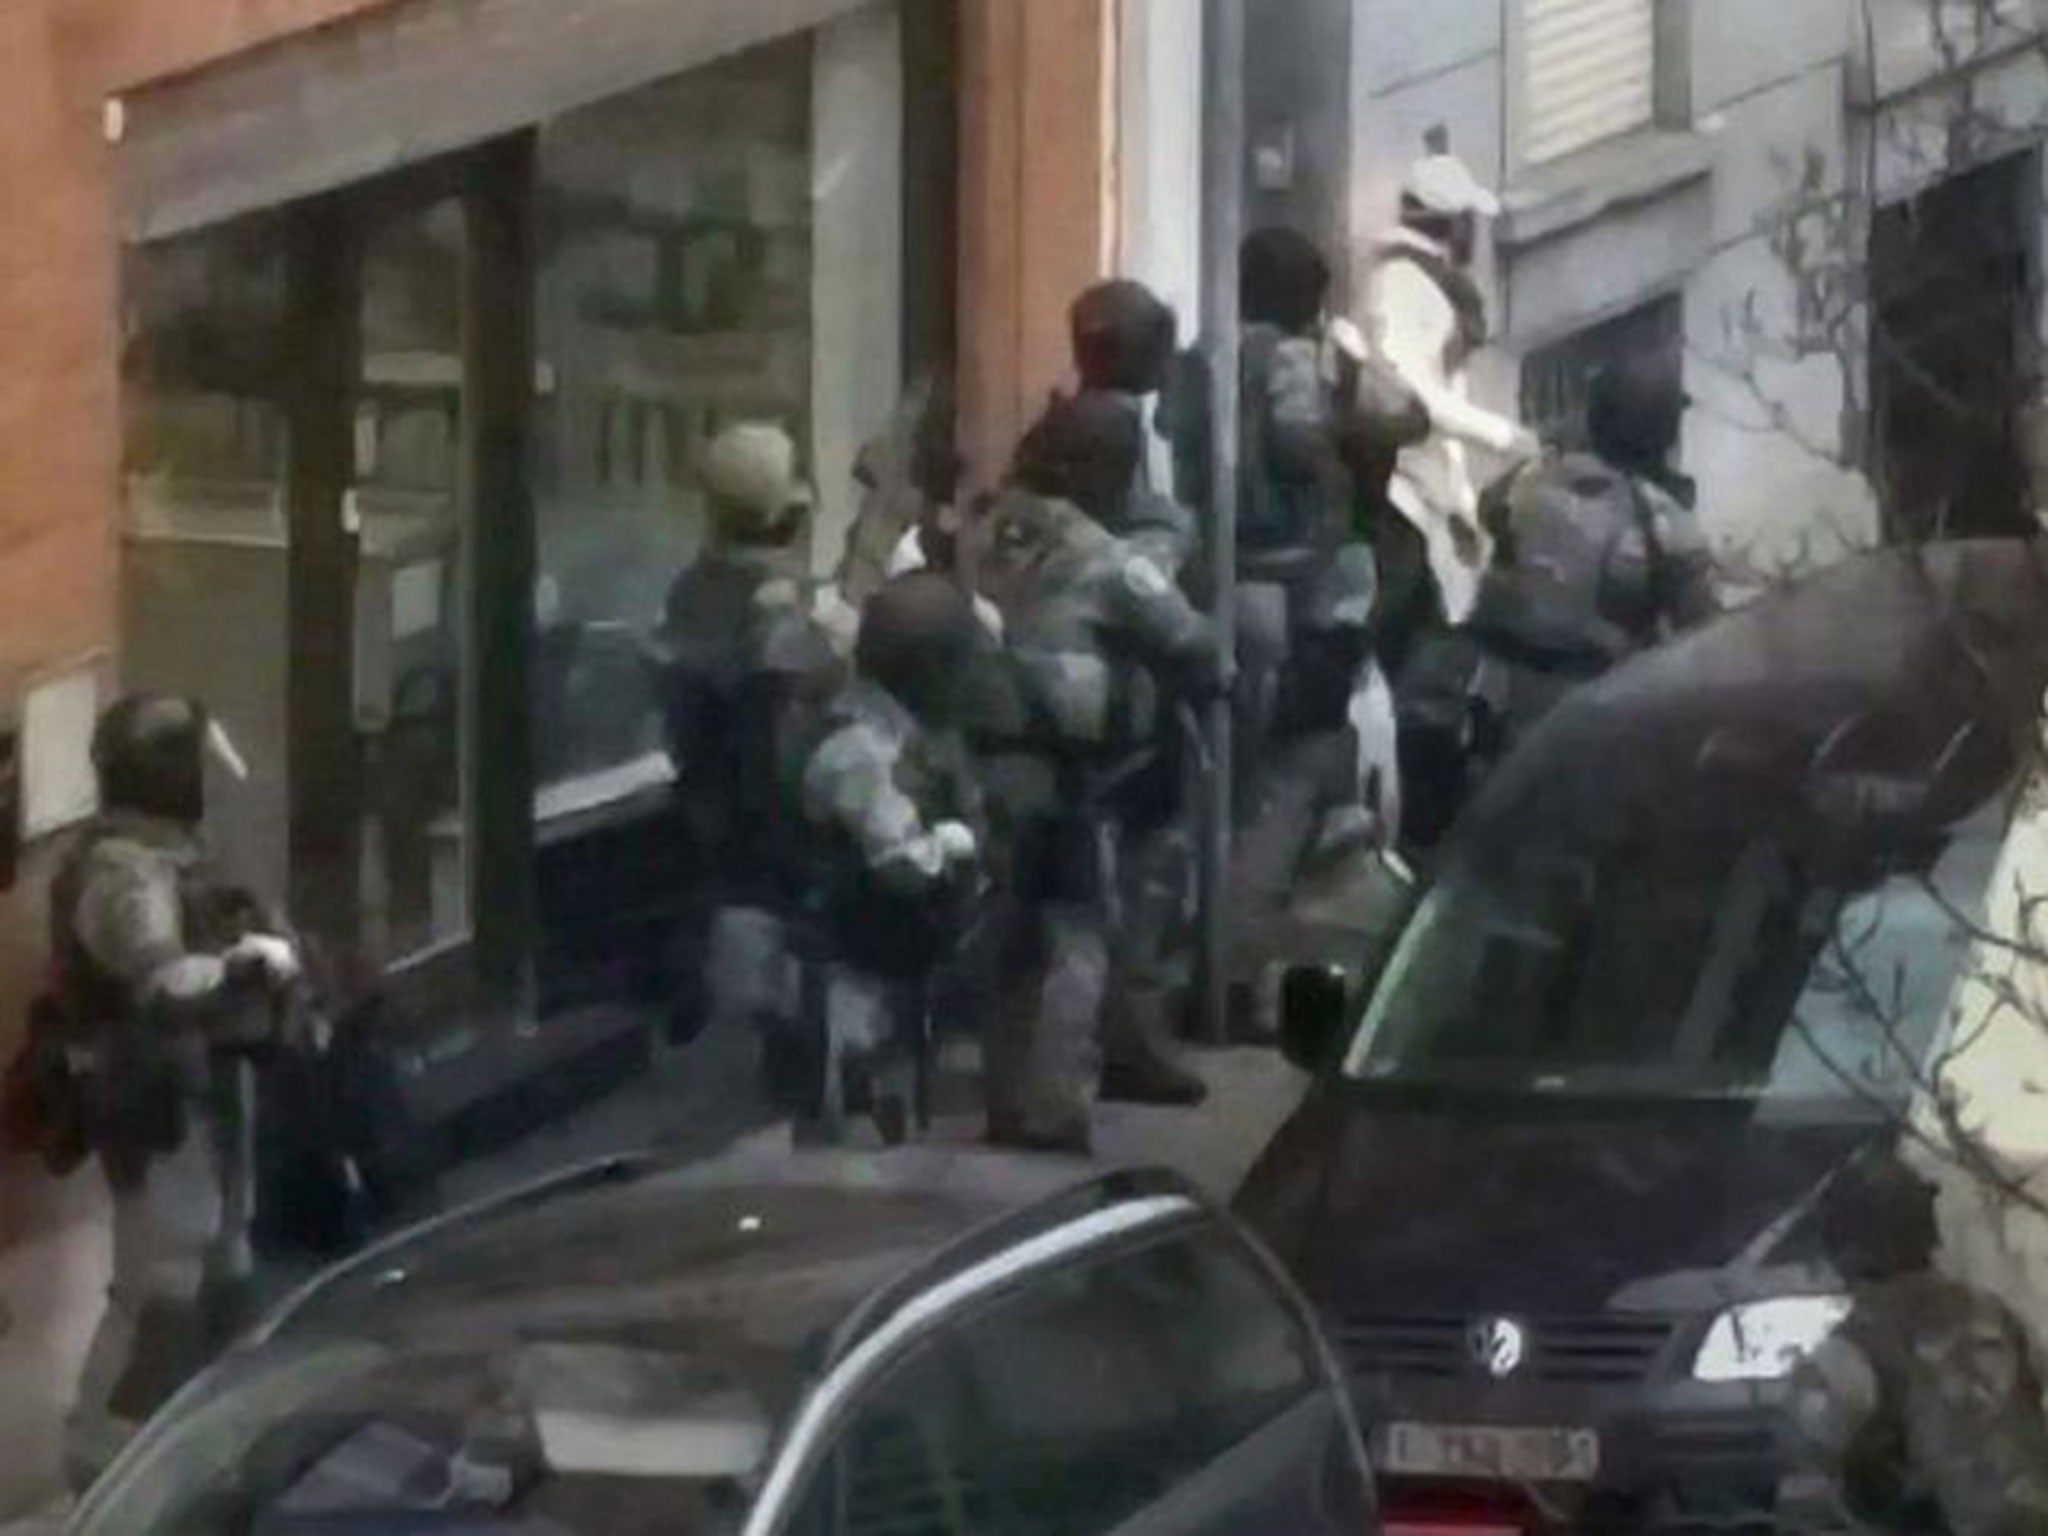 The raid in which Abdeslam was arrested in Brussels